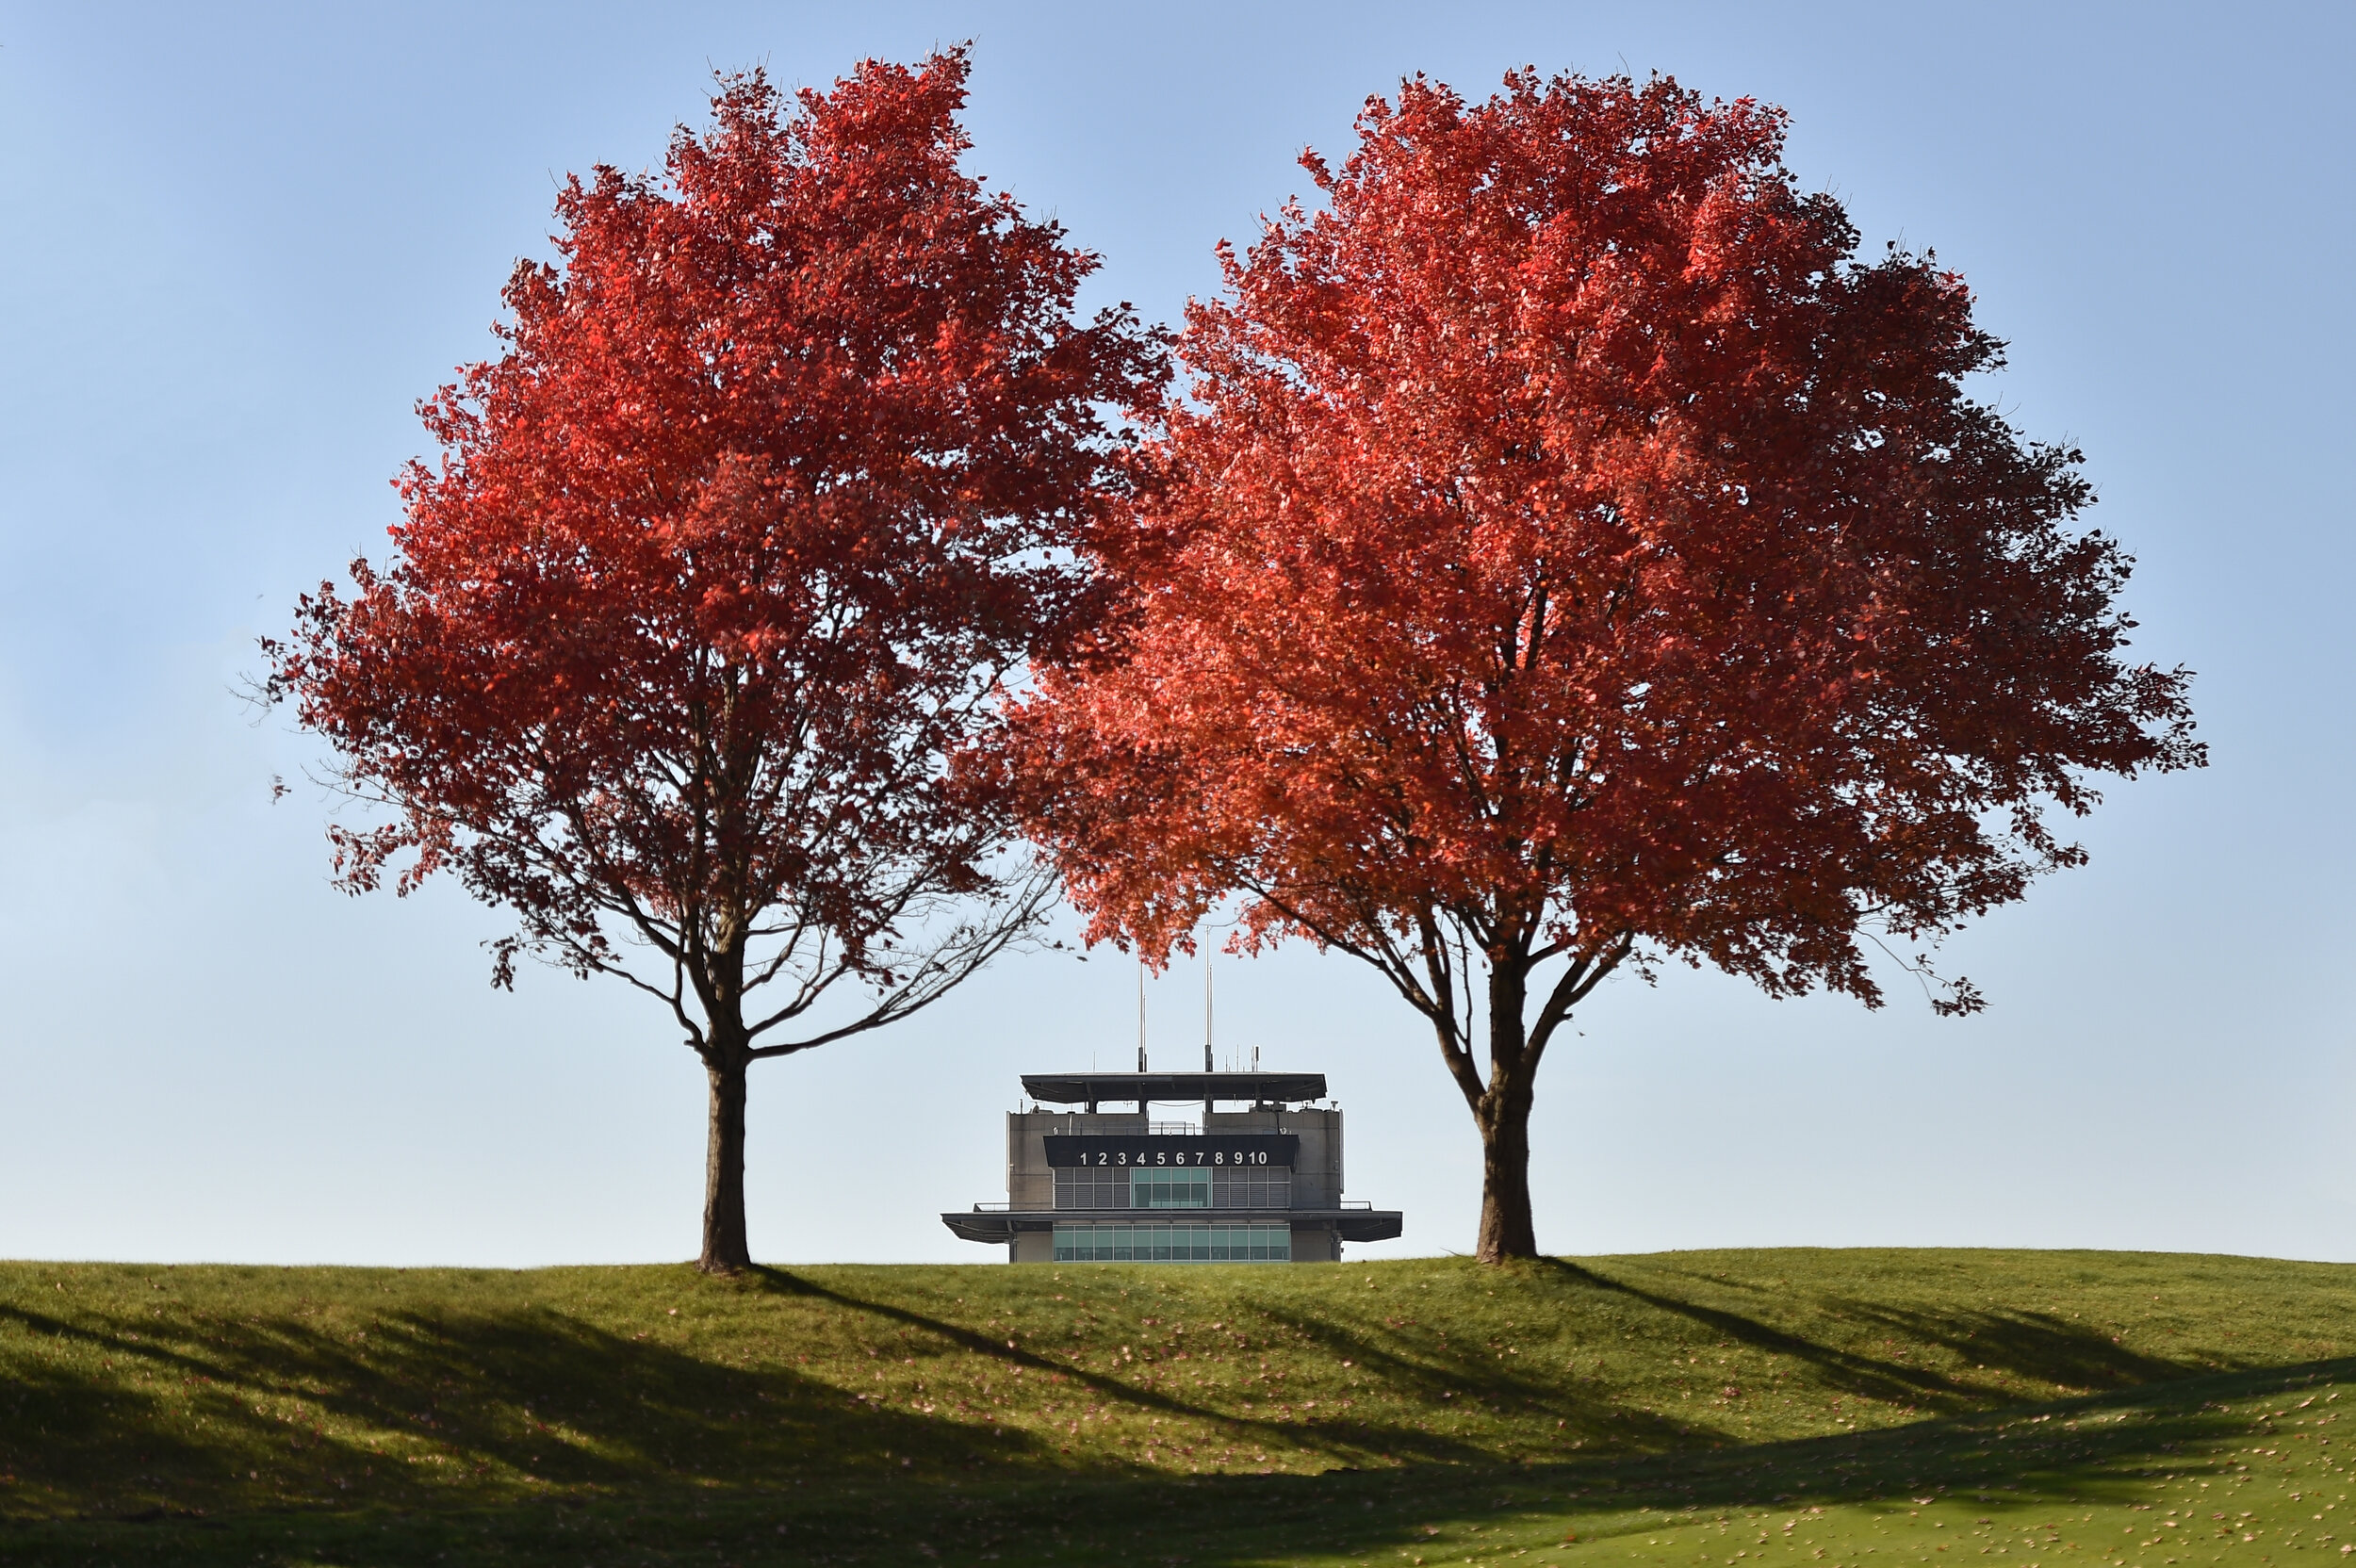   Fall at IMS. When most of us picture IMS we think of a sunny day in May. IMS displays all seasons during the year. I find this one recently shot in November especially colorful and simple. 